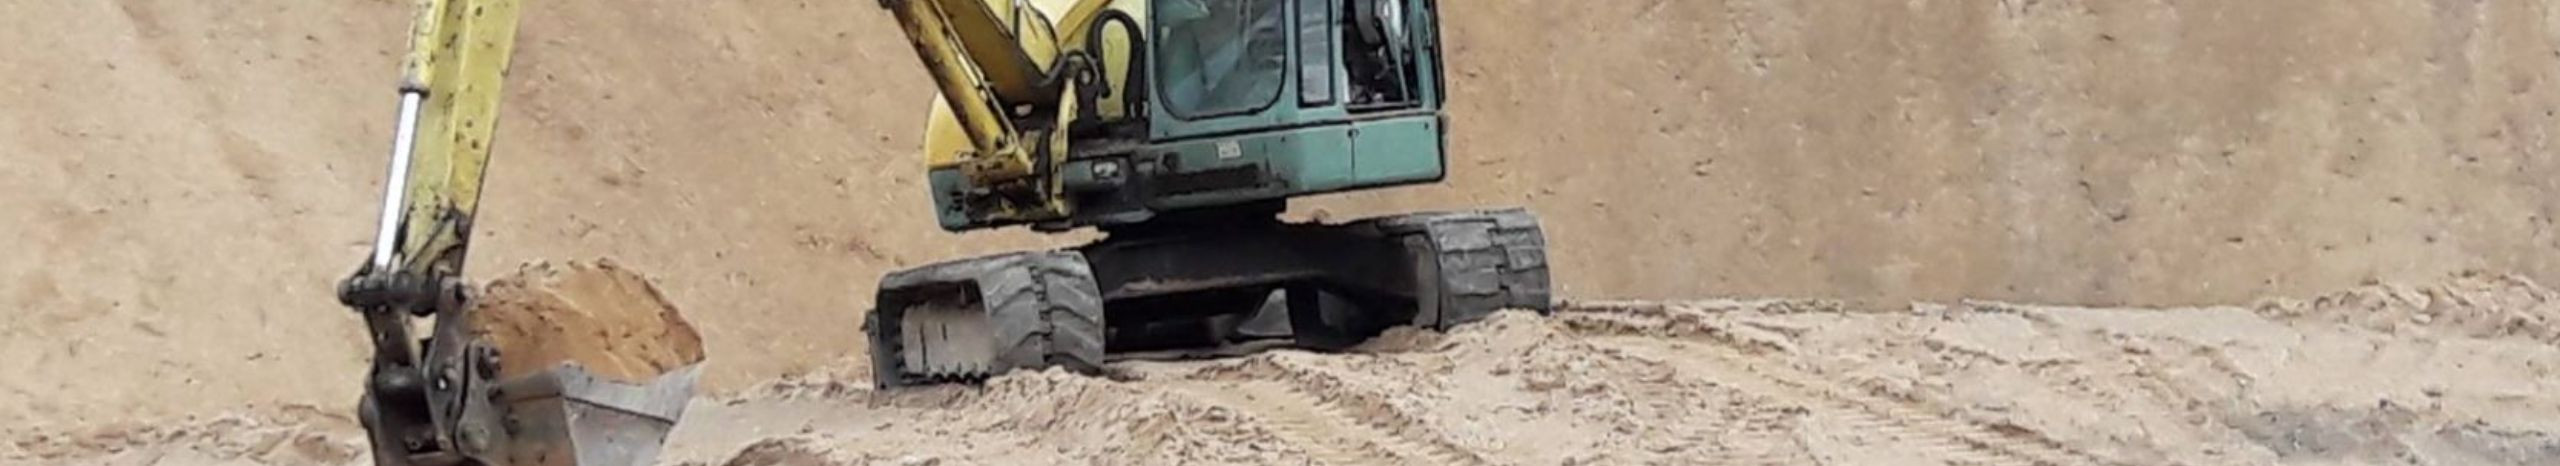 excavation and soil work, Construction, Land heating contours, Construction of water and sewerage lines, Imbalances, Multilift Tipper, Gravel, broken stone, soil, excavation work